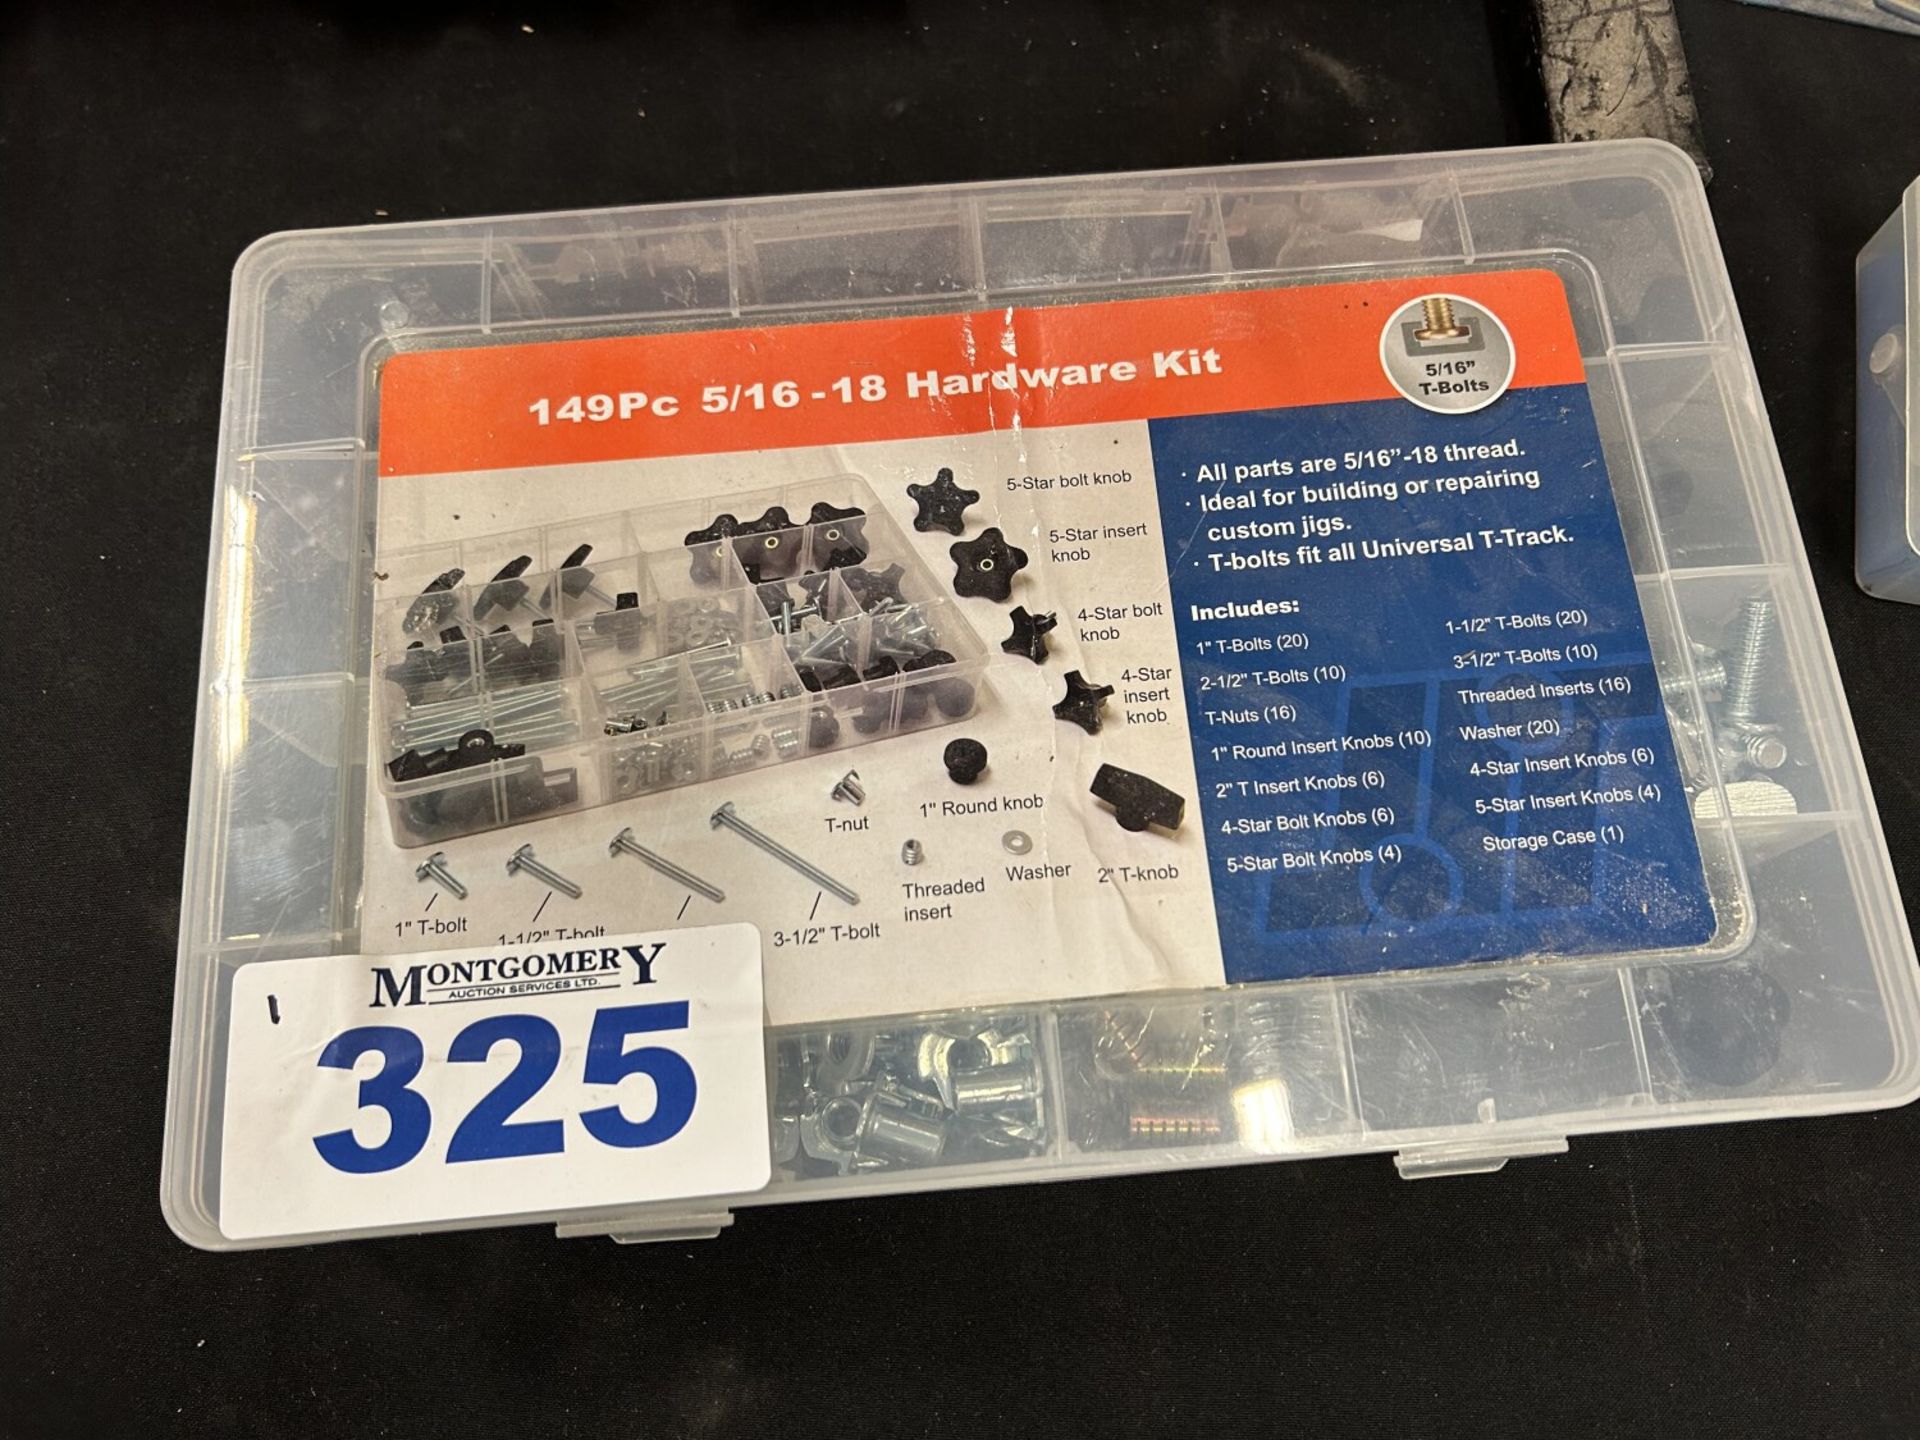 HARDWARE ASSORTMENT KIT, WIRE HEAT SHRINK WRAP, HARDWARE ASSORTMENT BINS AND CONTENTS - Image 2 of 4